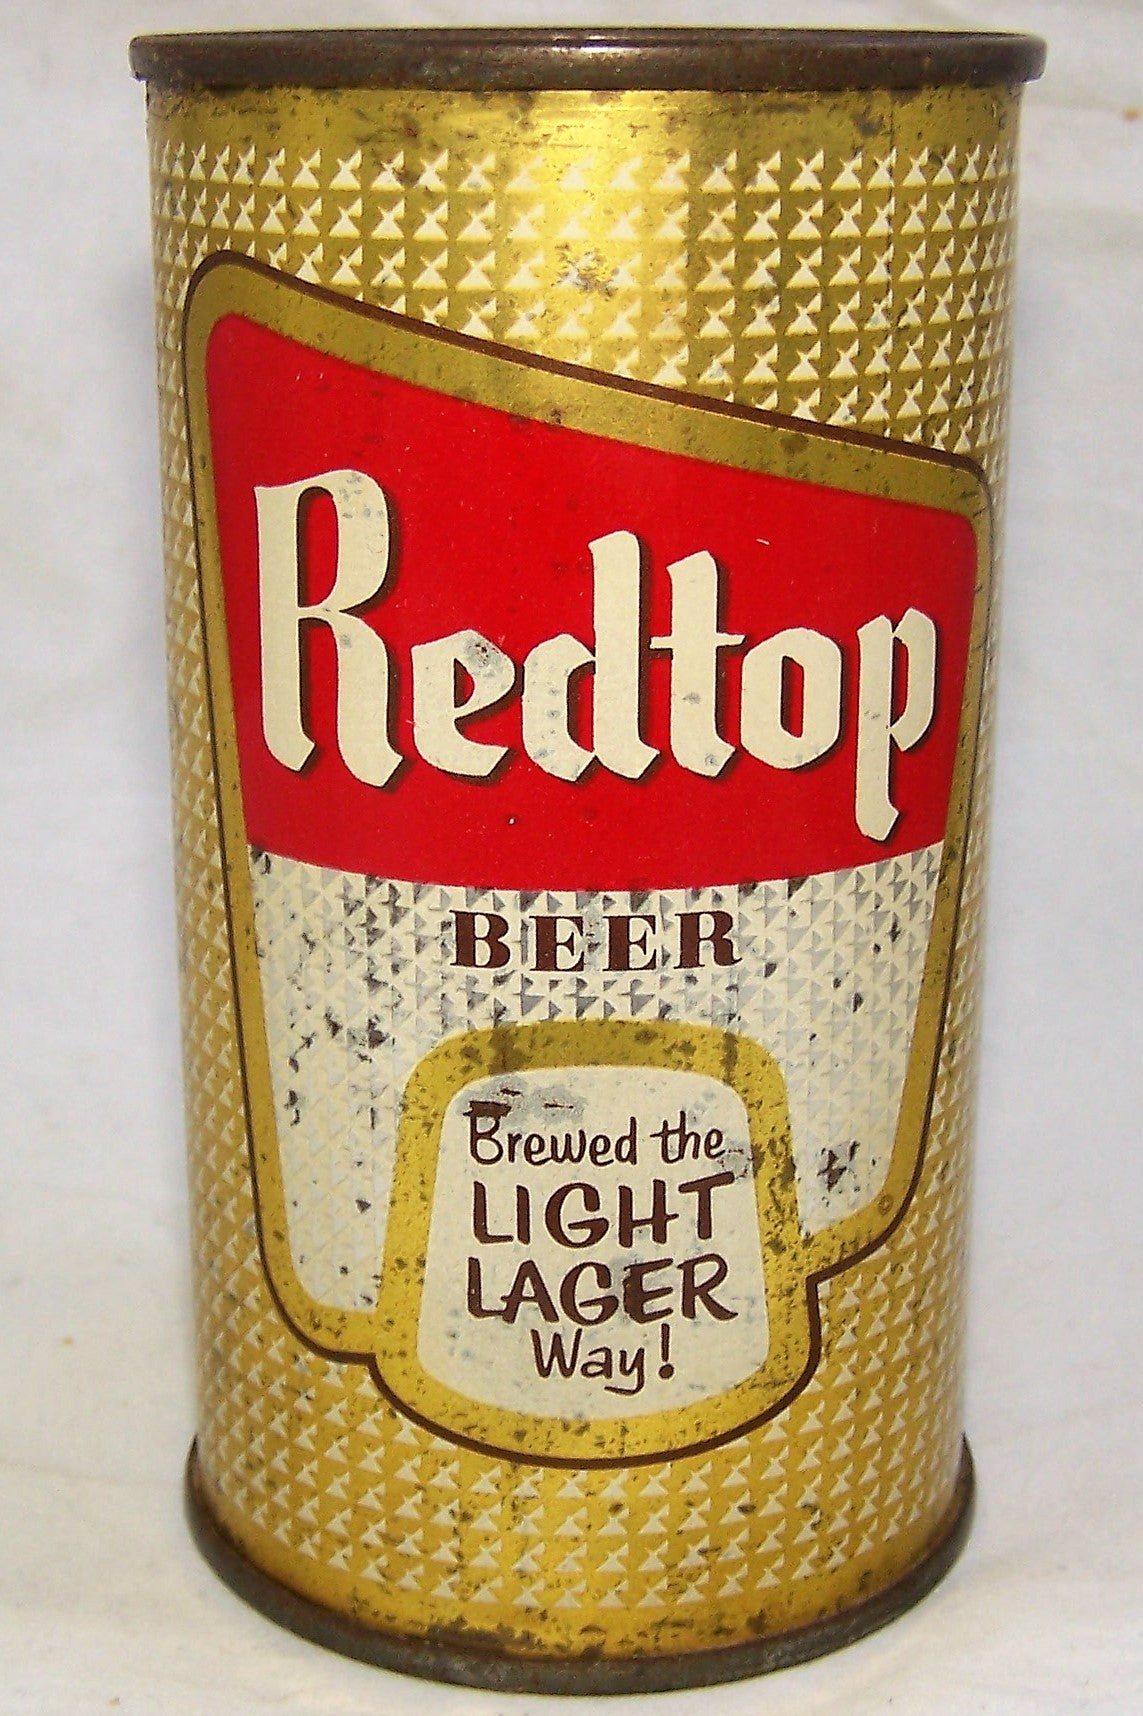 Red Top "Brewed The Light Lager Way"